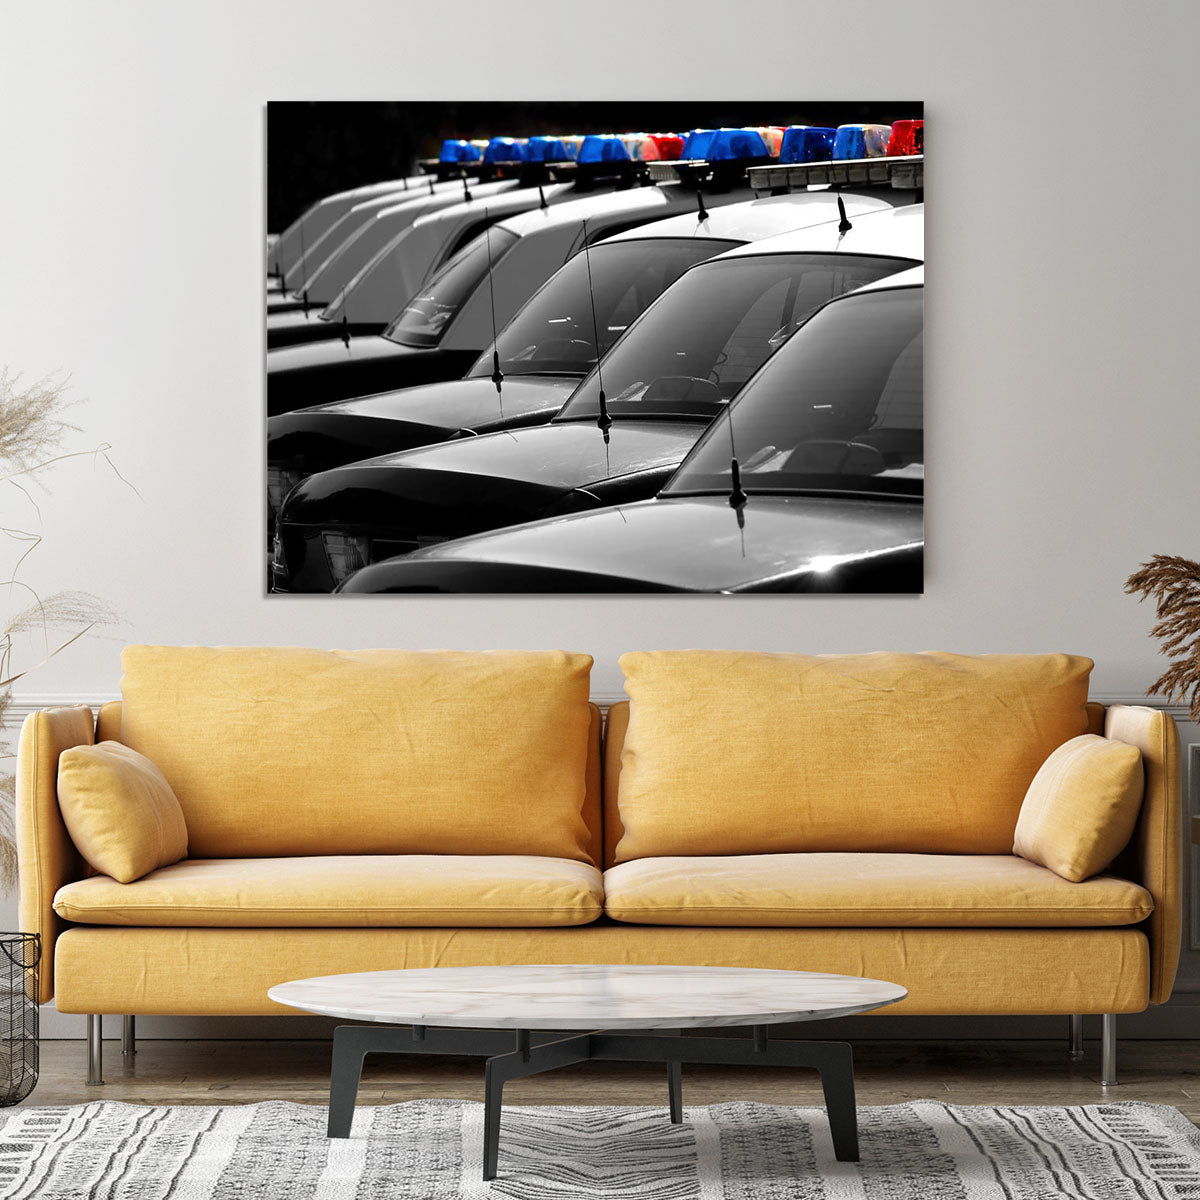 Row of Police Cars with Blue and Red Lights Canvas Print or Poster - Canvas Art Rocks - 4